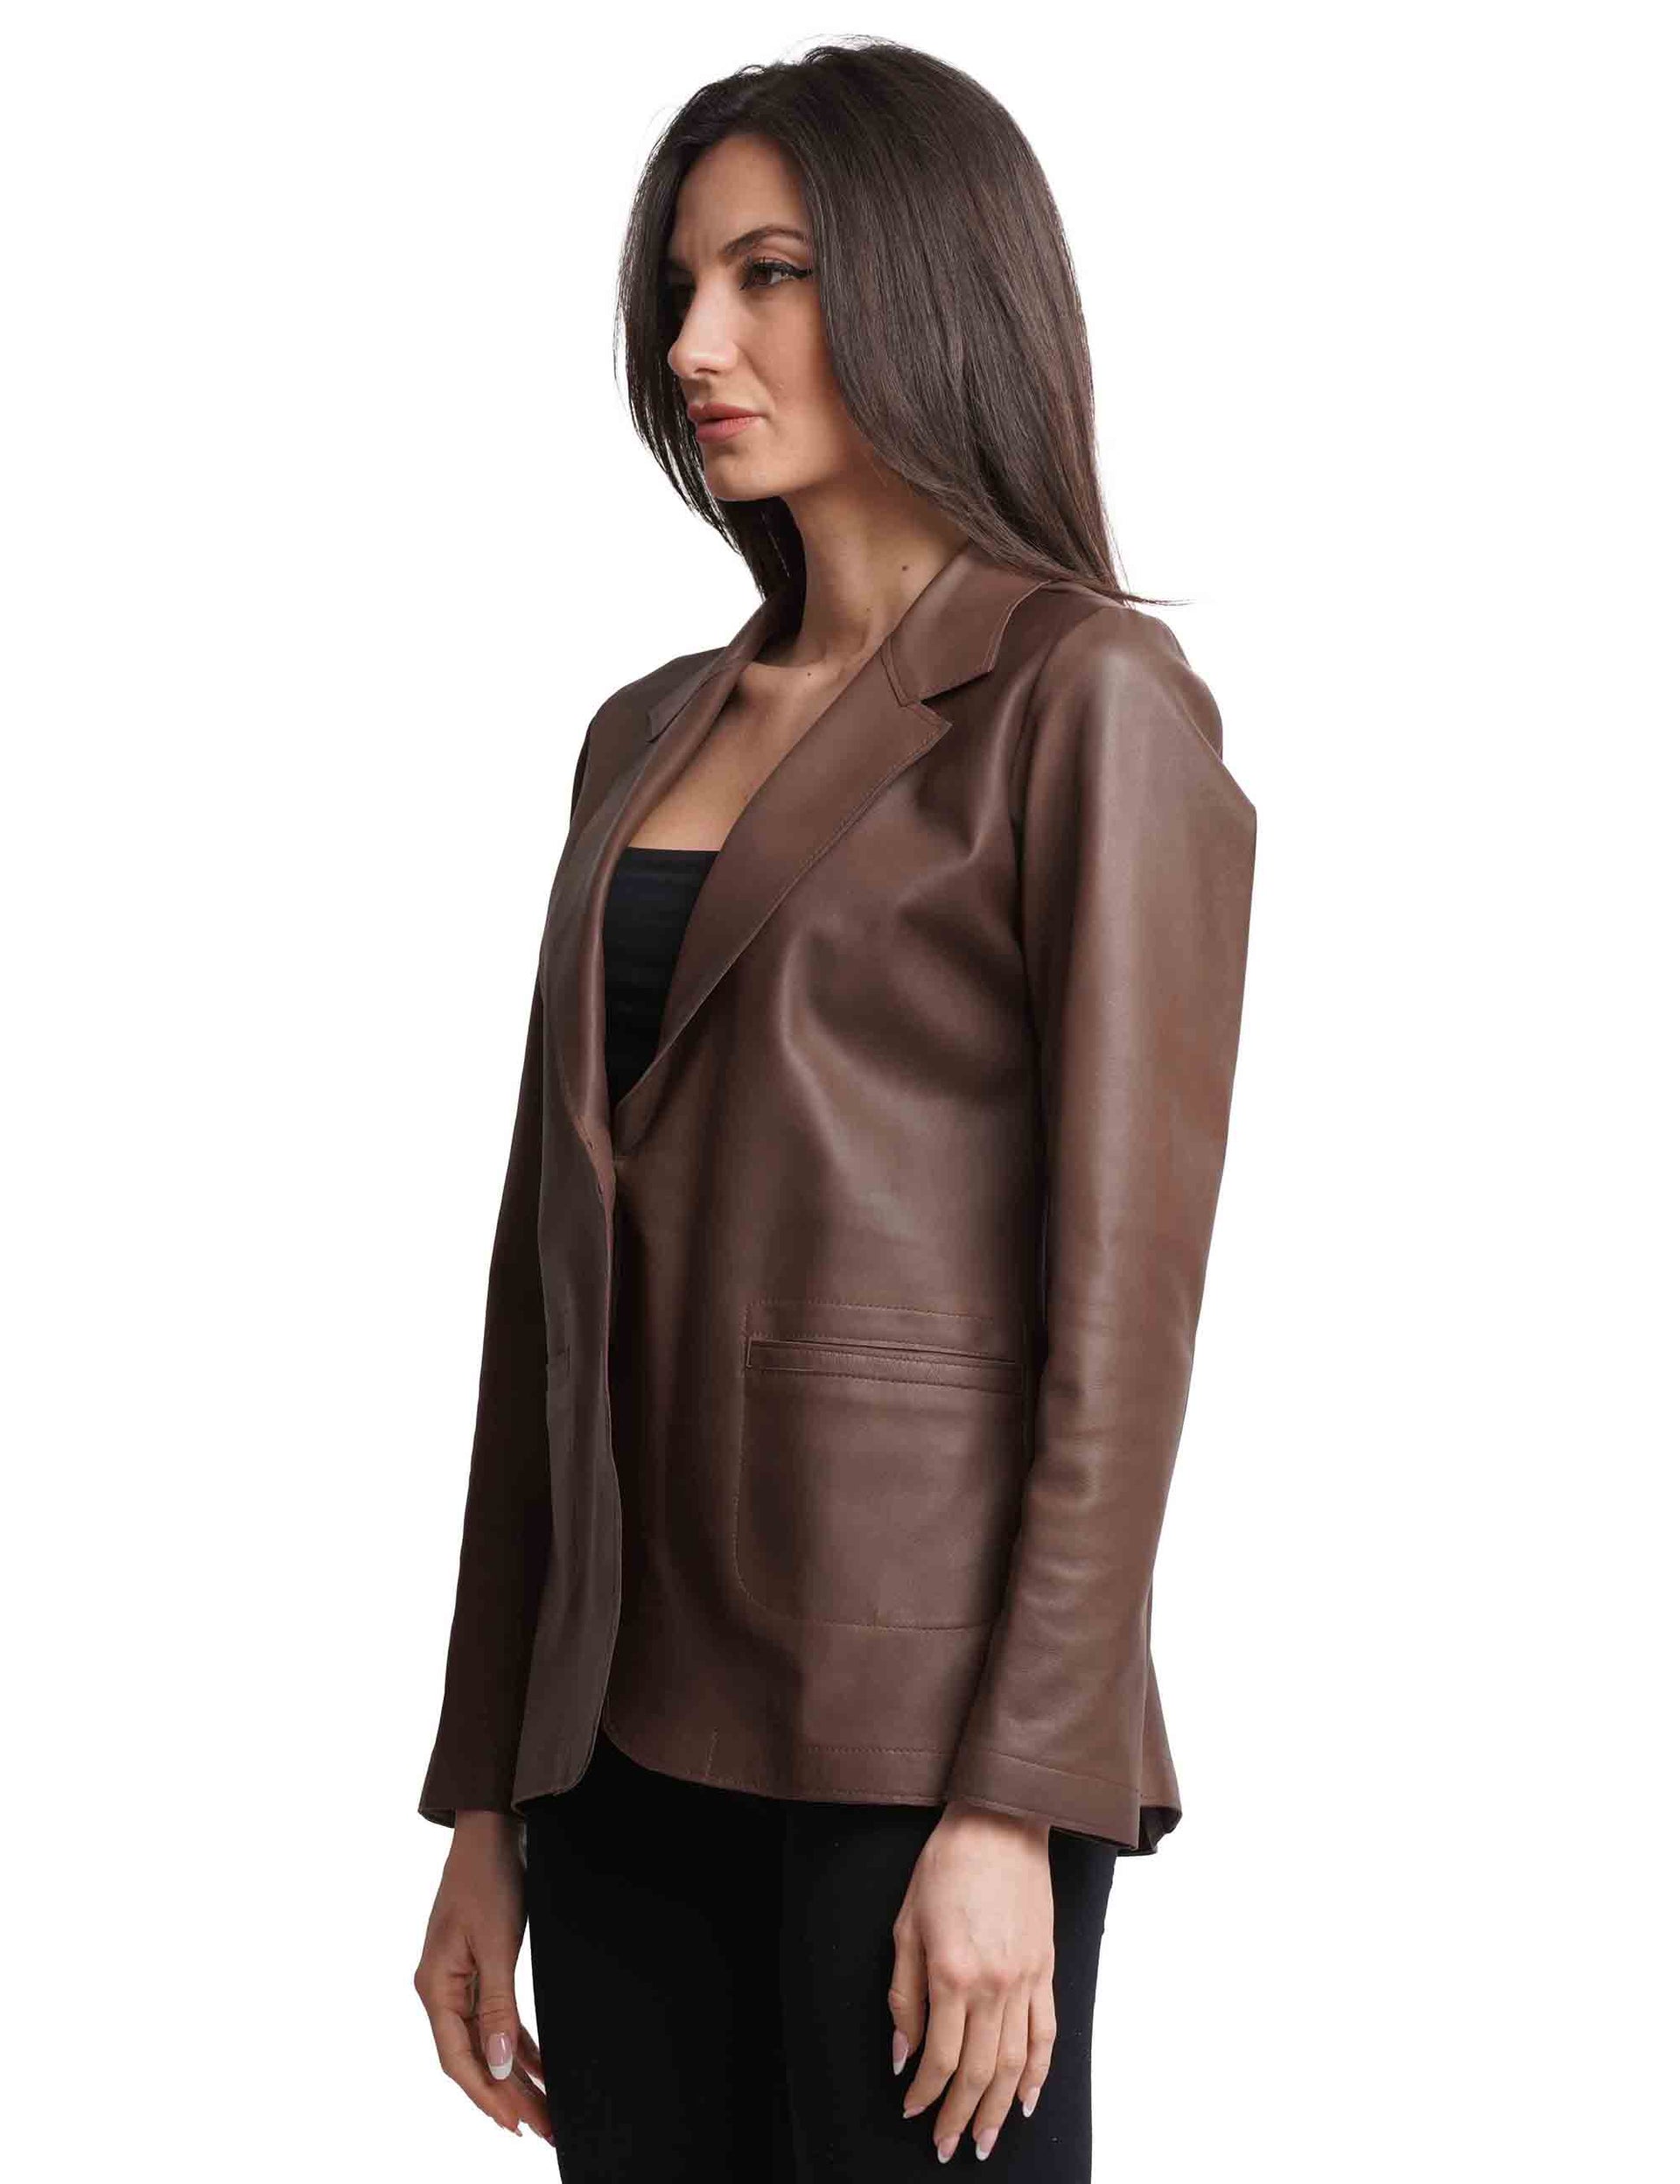 Single-breasted women's jackets in brown unlined leather with 1 button